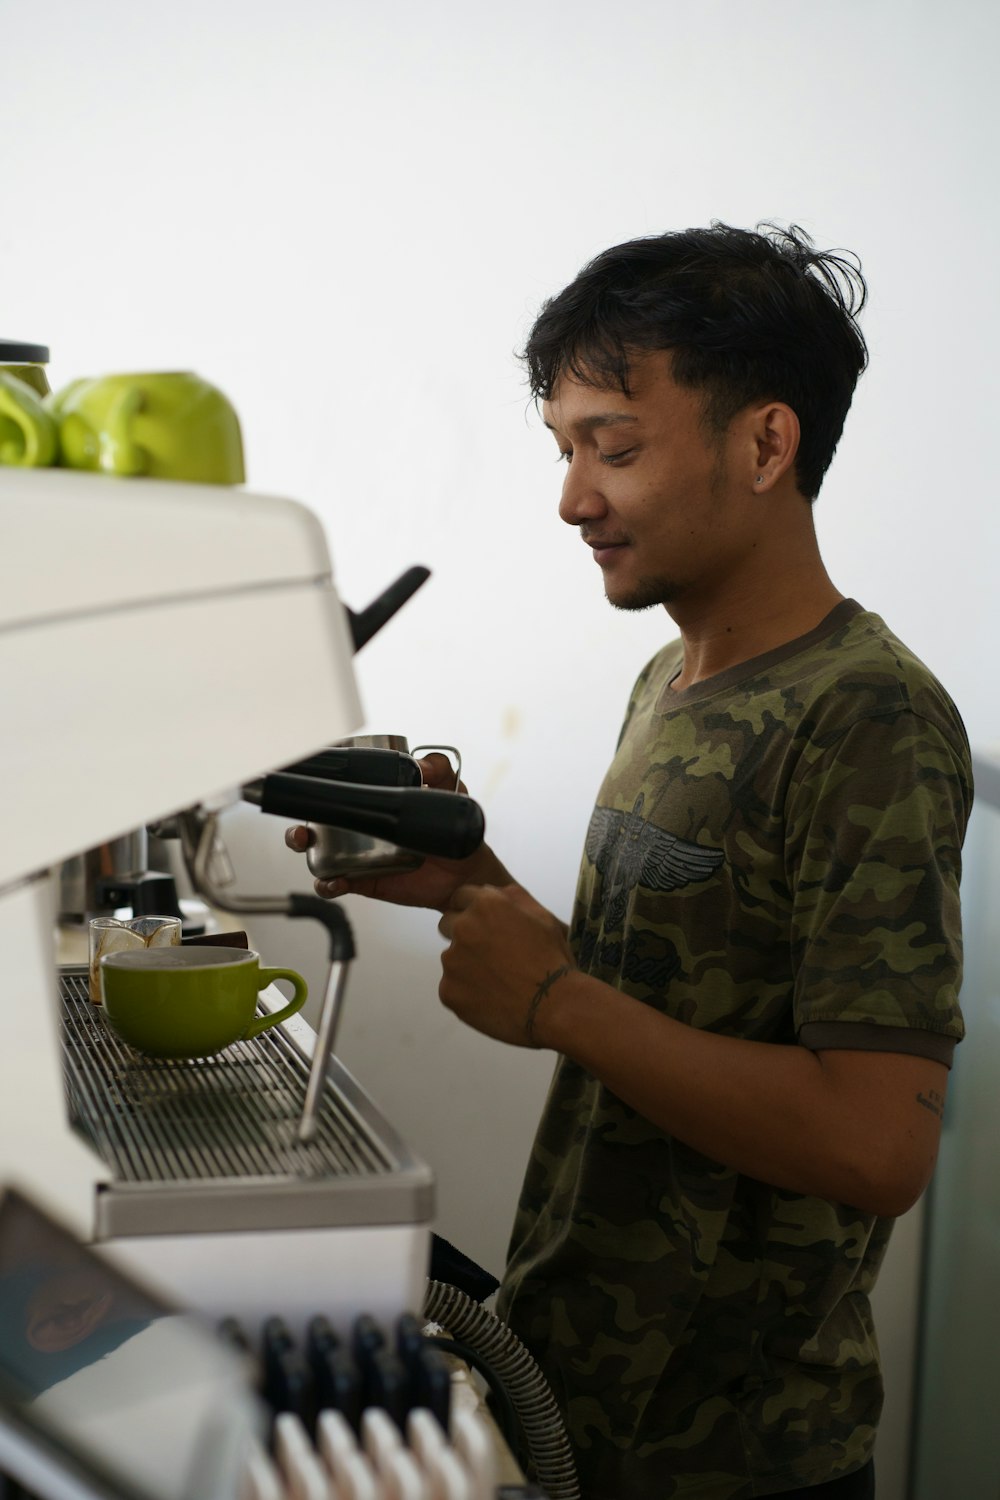 a man standing next to a machine filled with green apples